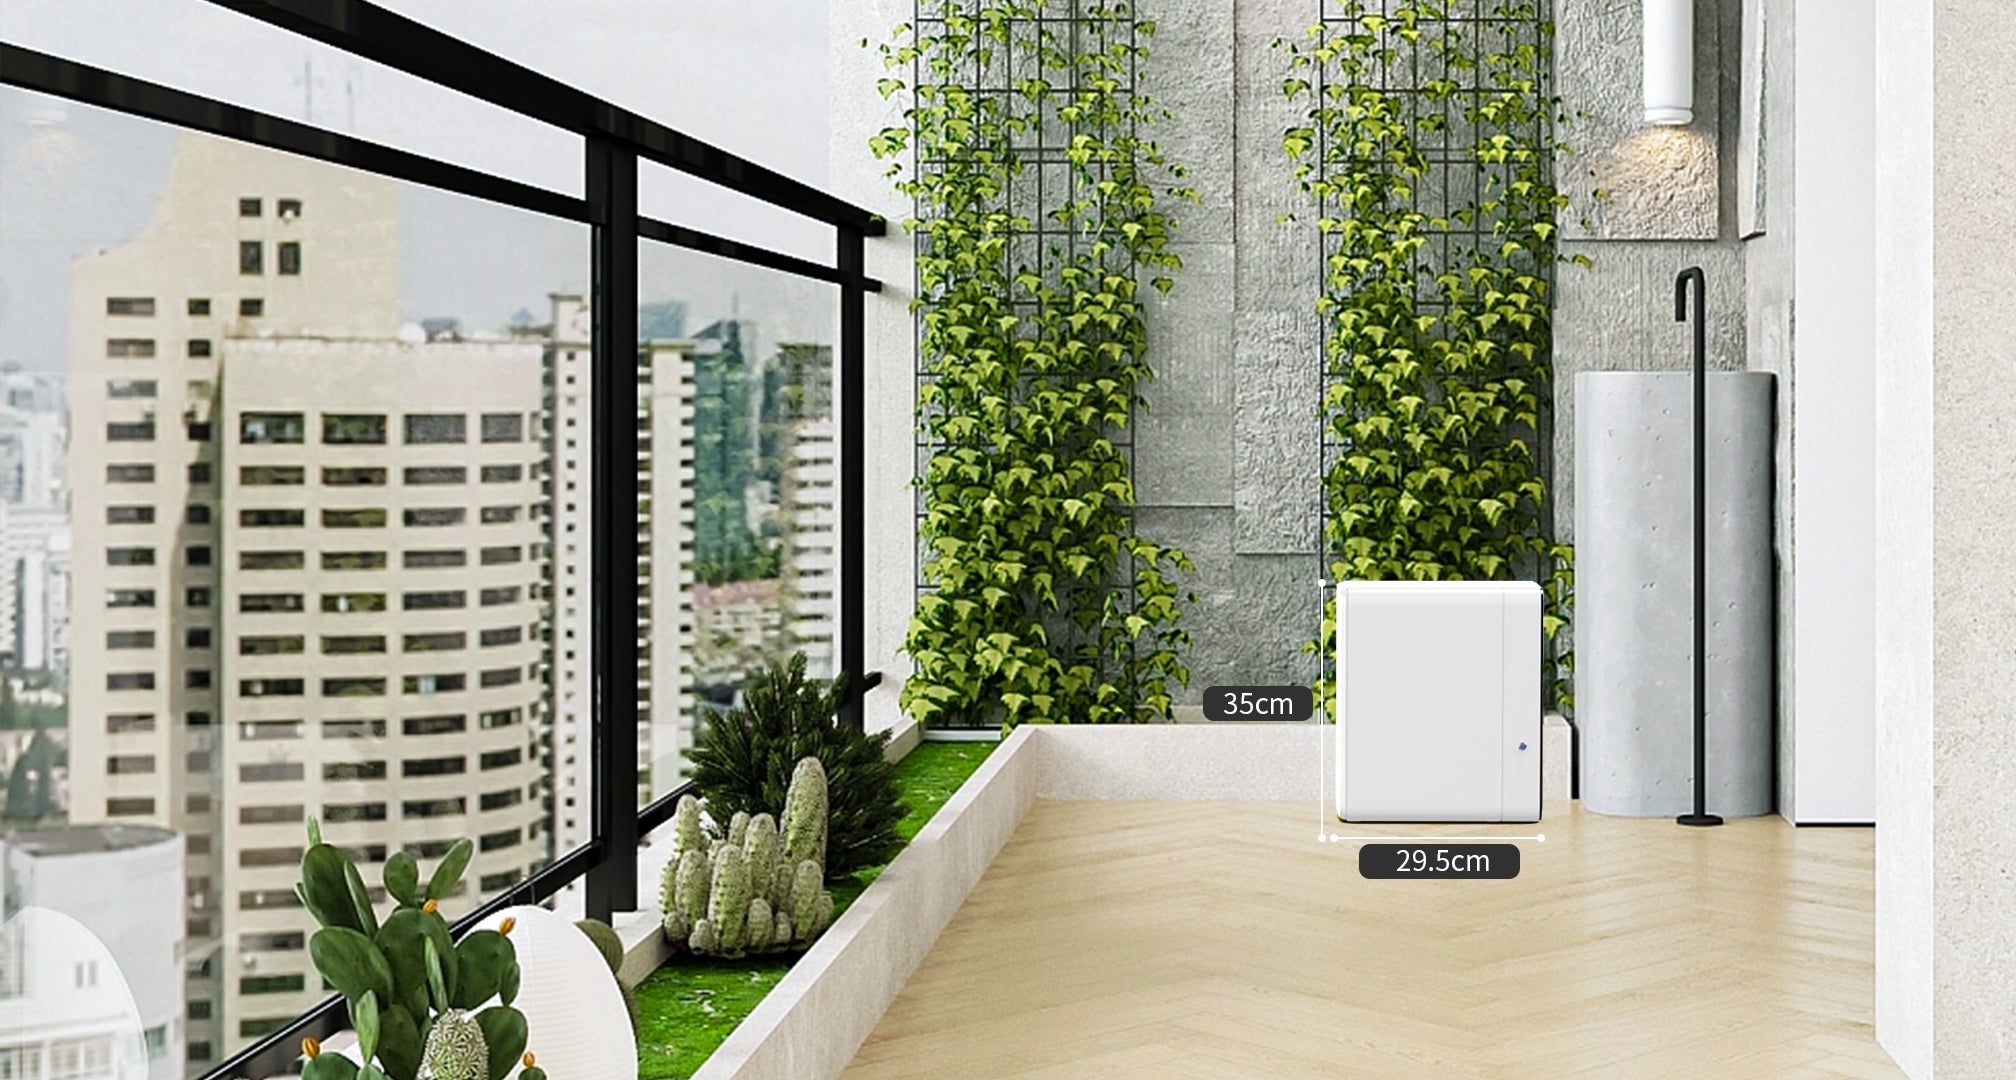 It occupies a small area, not affecting the balcony space at all, yet a single unit stores up to 2240Wh of energy.